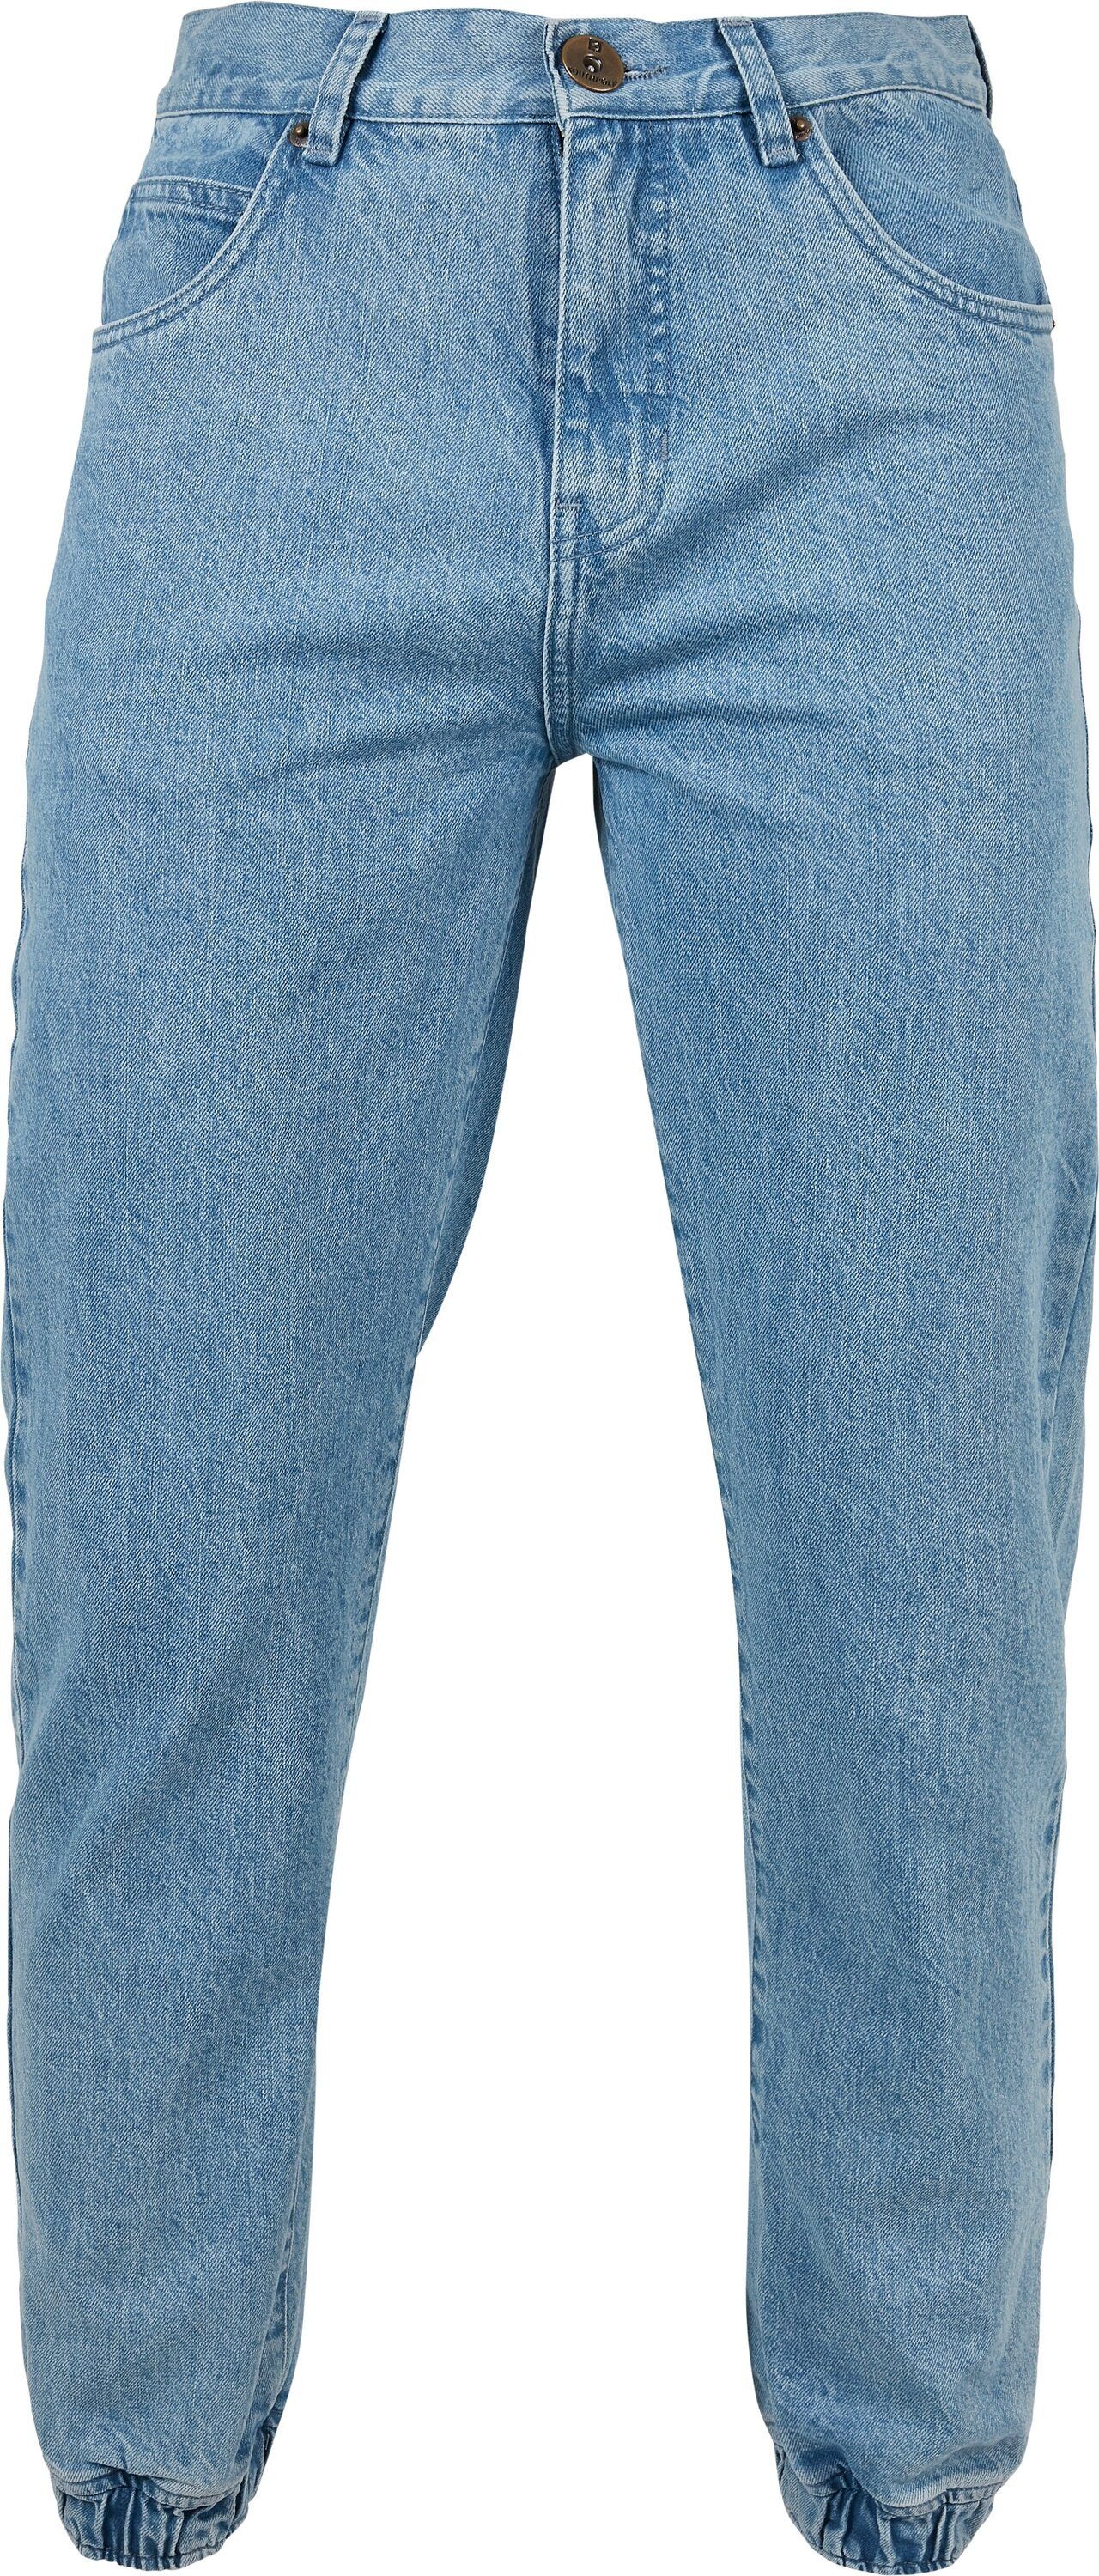 Southpole Bequeme Jeans midblue washed Logo Denim Southpole (1-tlg) Herren Spray